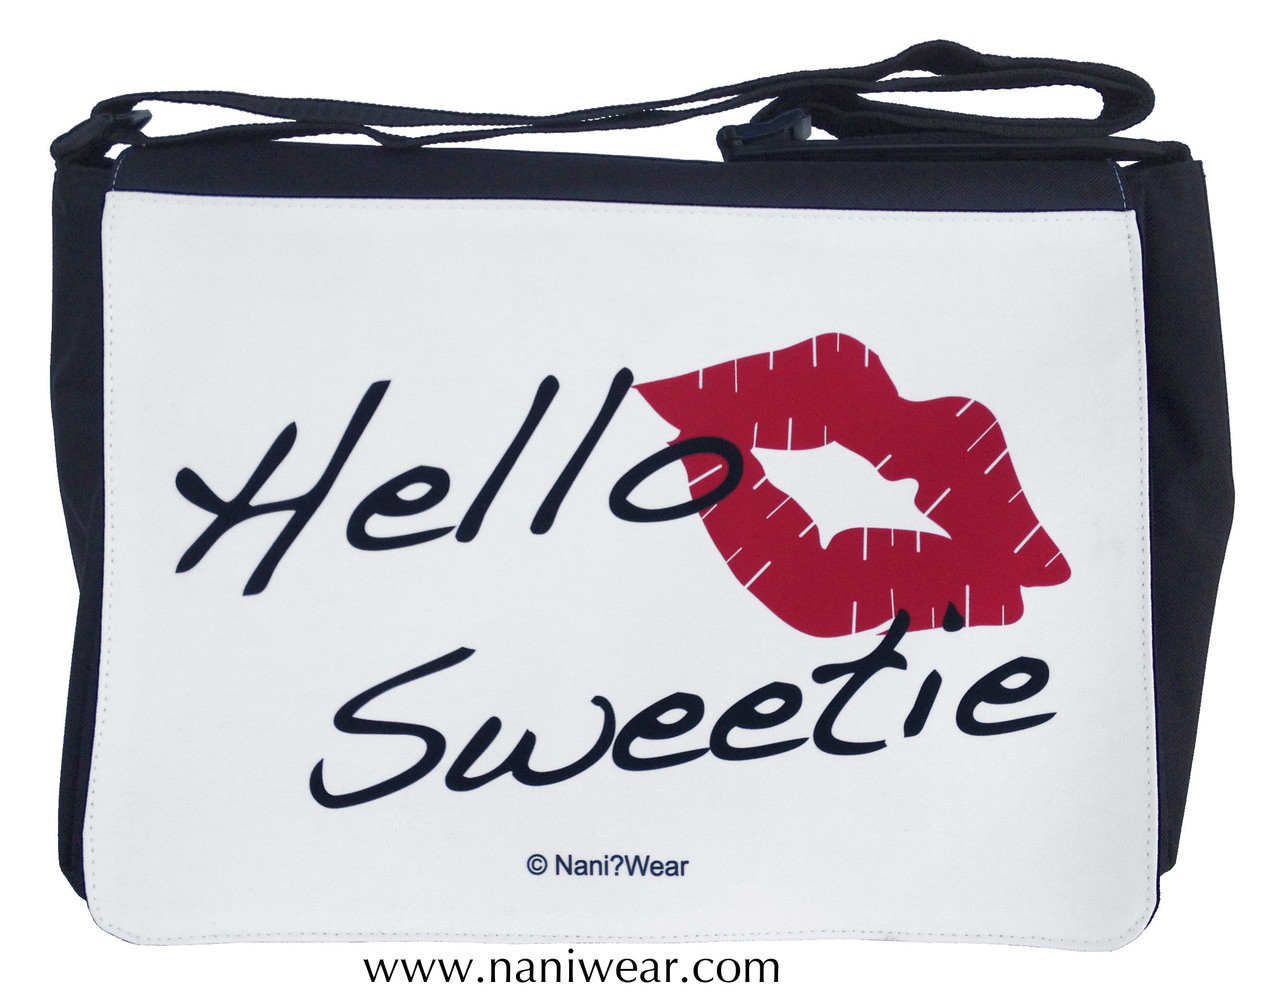 Admire this cute and practical little bag from Sweety Candy!